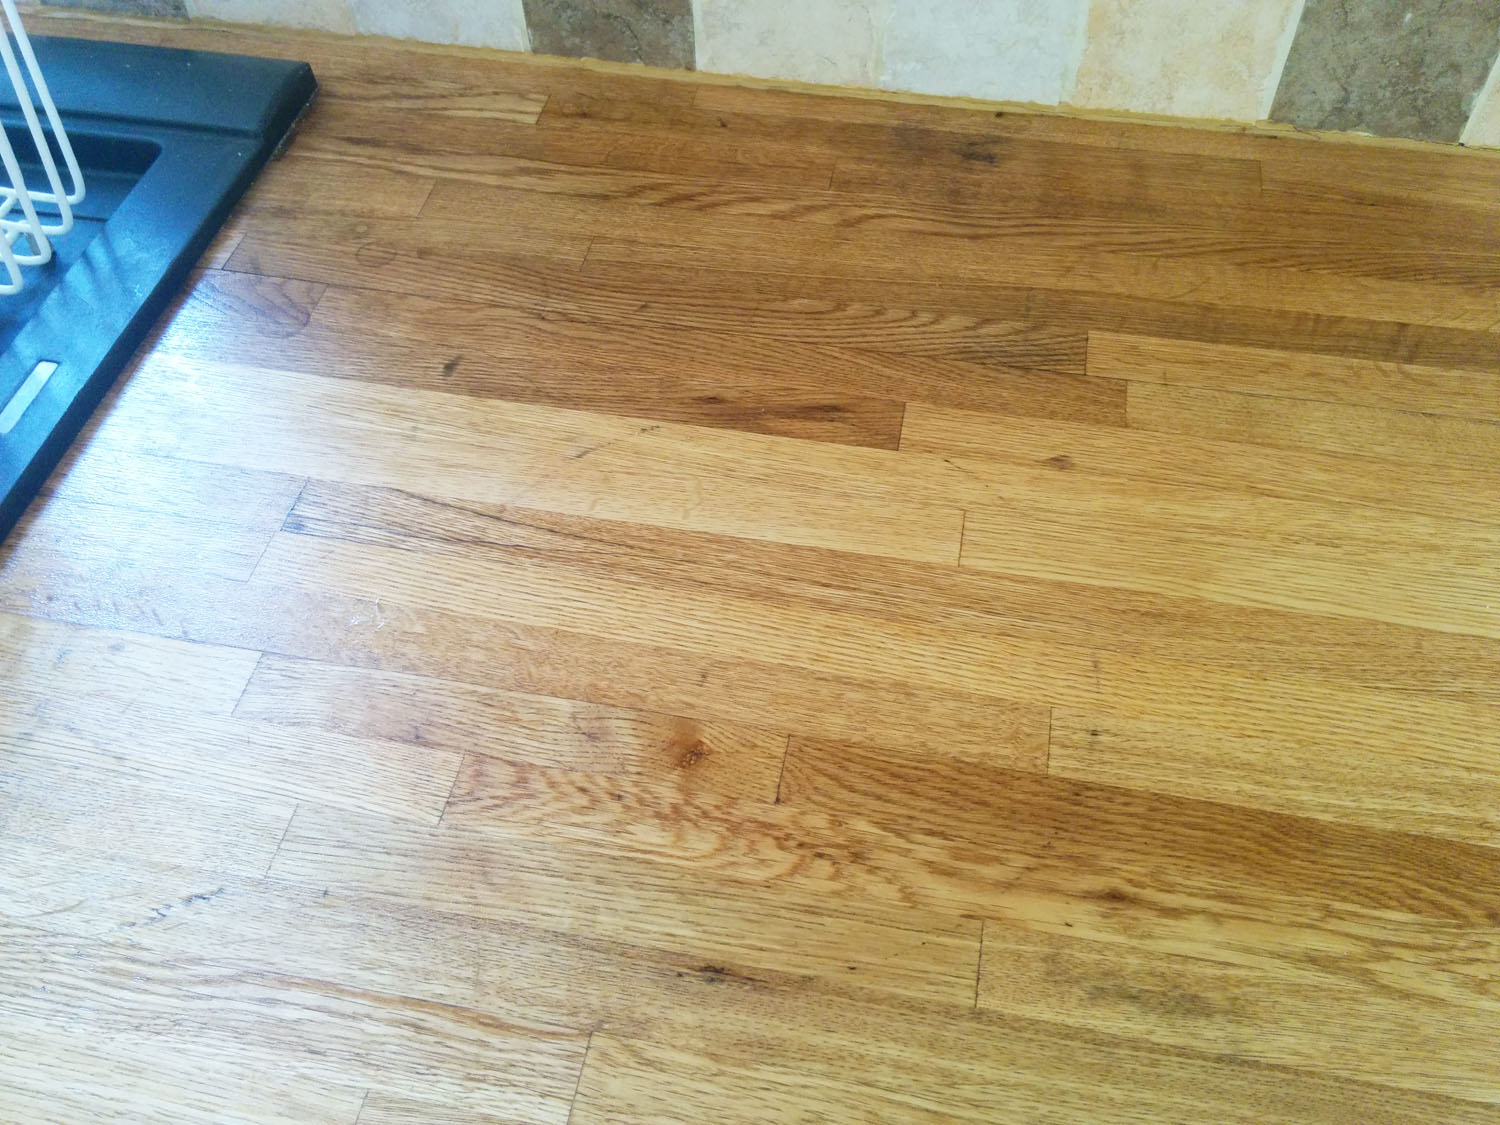 Kitchen worktop after oiling 1